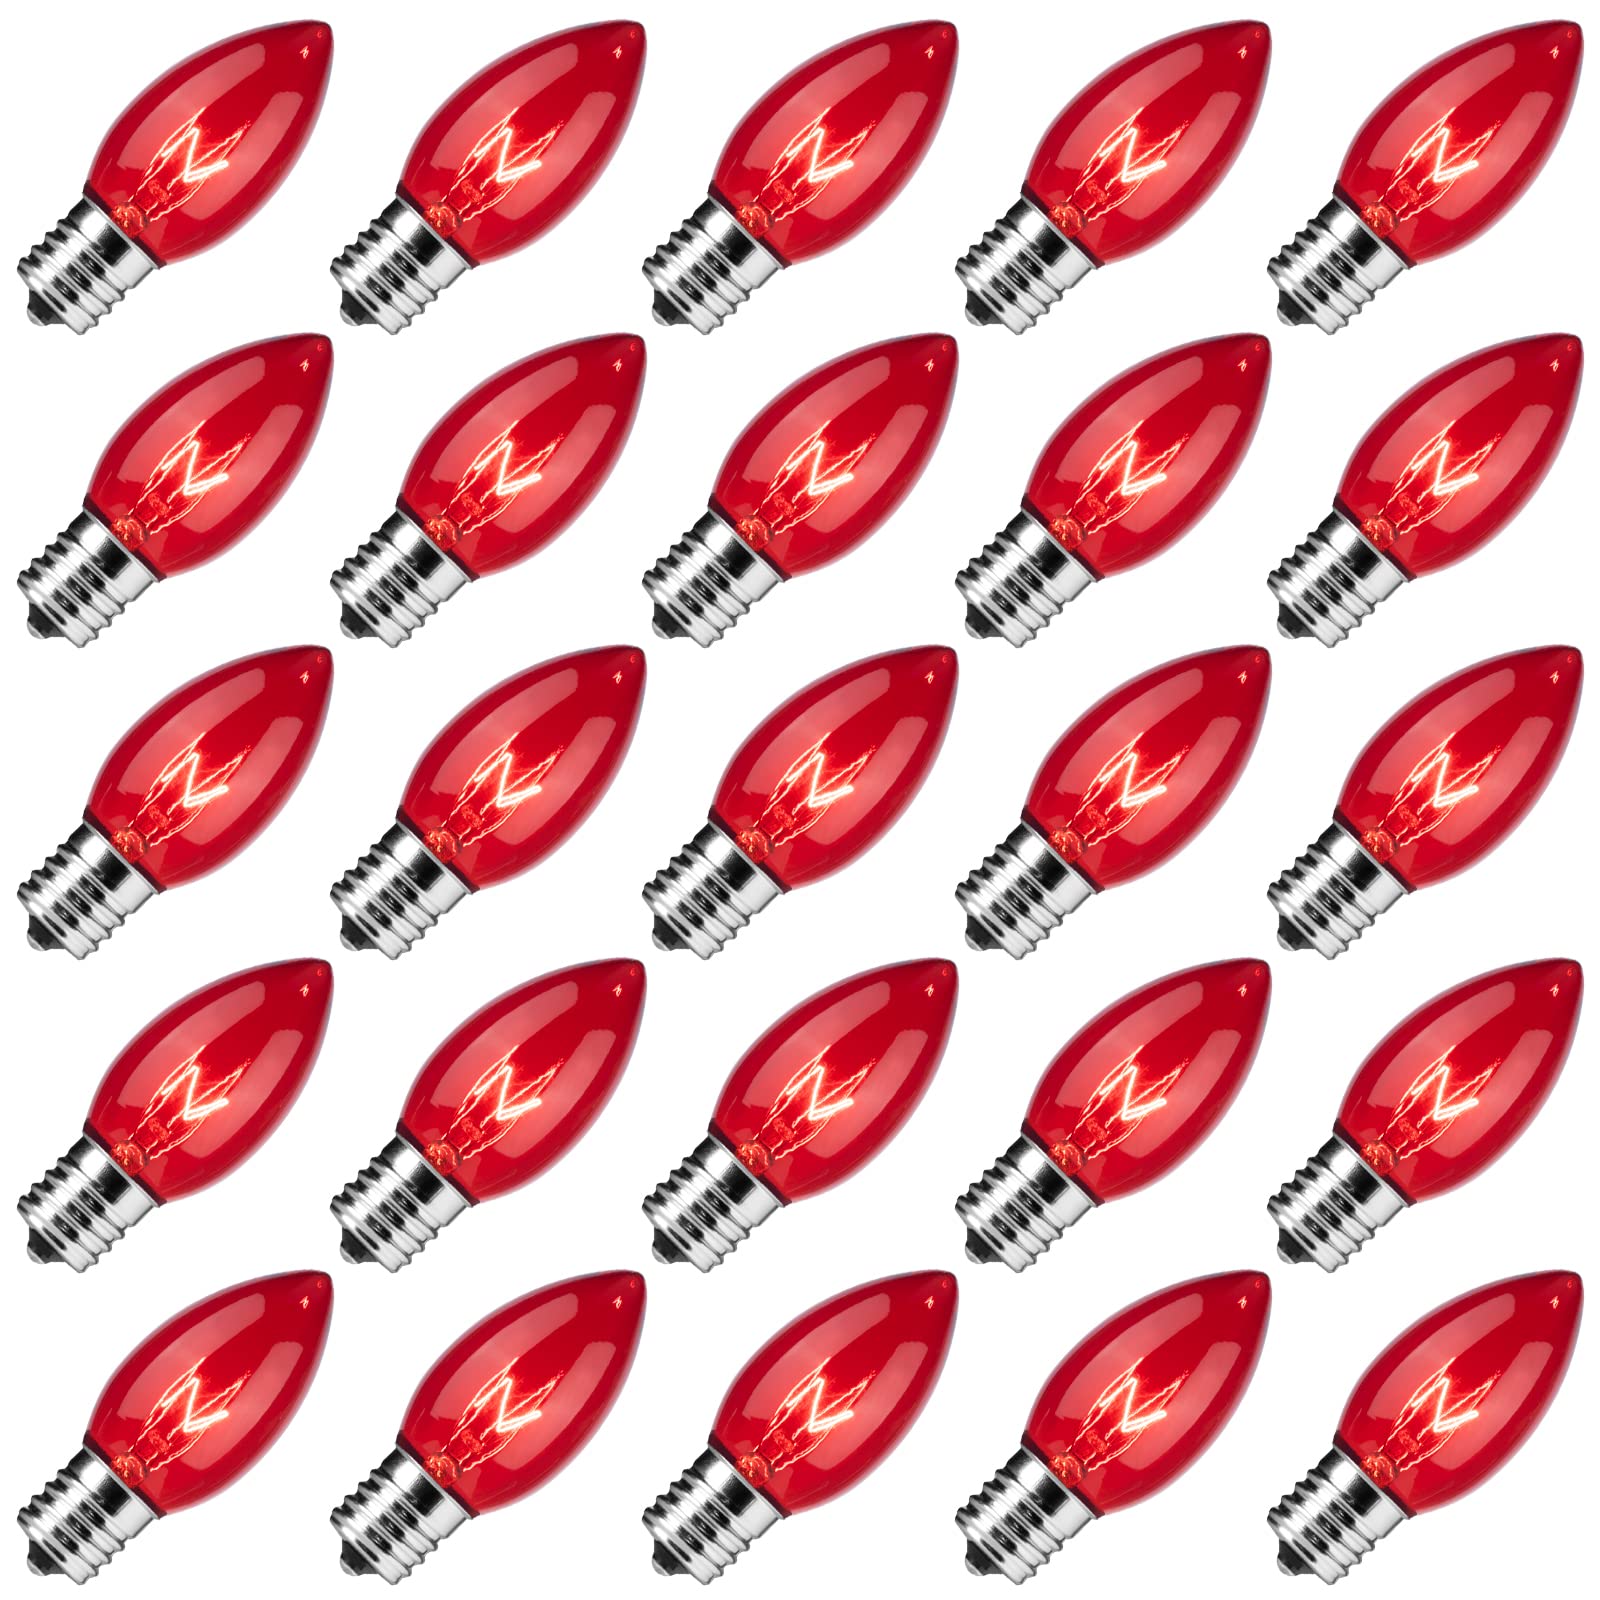 25 Count / Satin Bulbs / Red